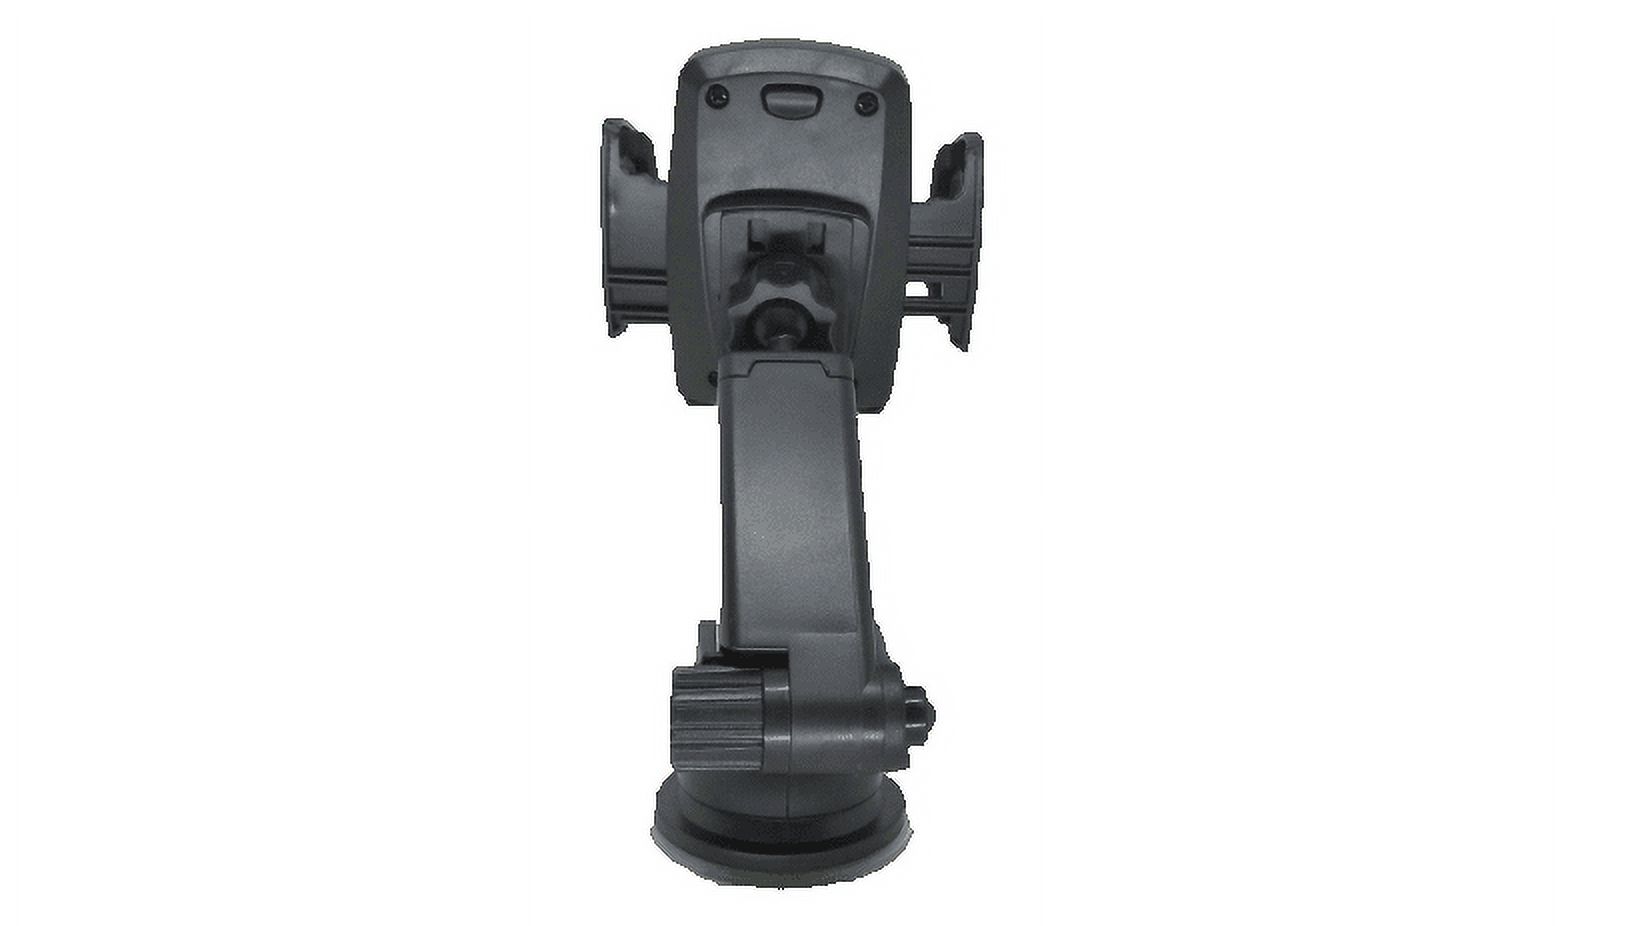 Can-Am Universal Vehicle Dash & Windshield Mount - Black. Car mount, truck mount, vehicle mount, cell phone car mount, car cradle, car cell phone holder - image 4 of 4